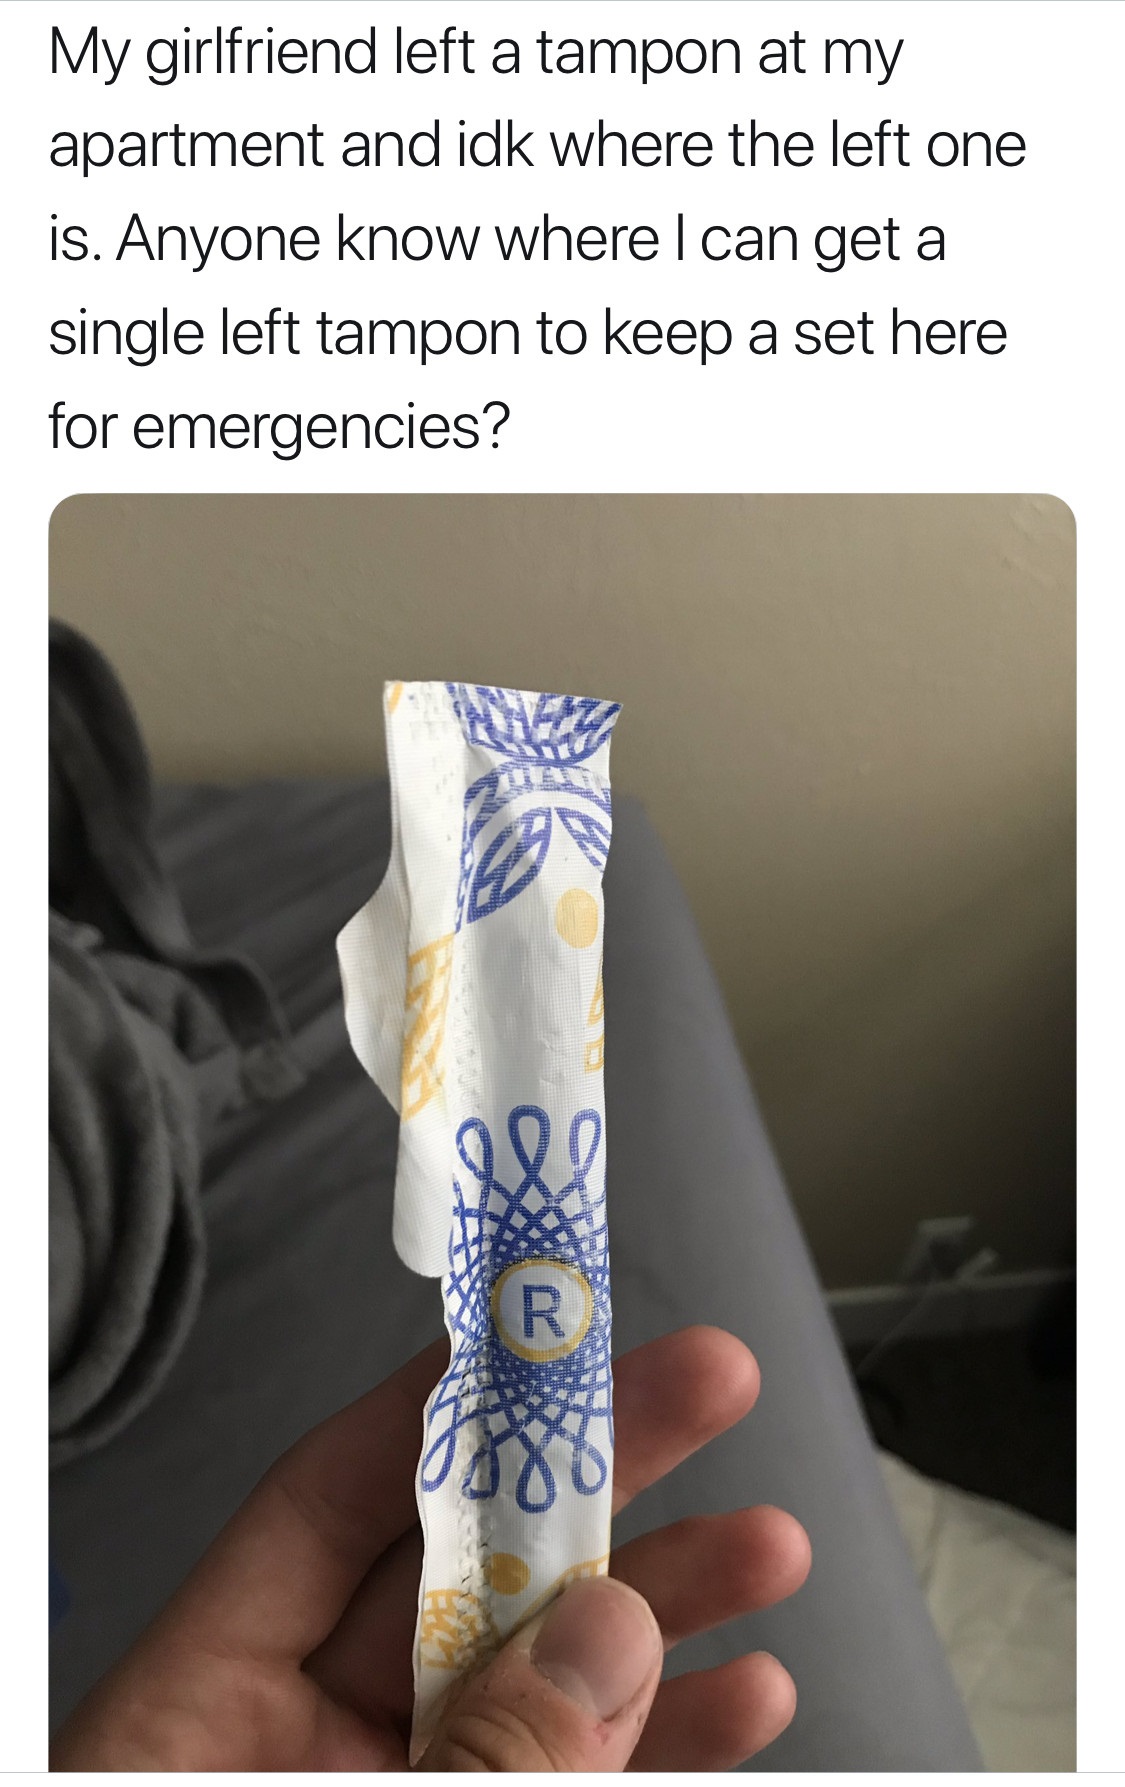 hand - My girlfriend left a tampon at my apartment and idk where the left one is. Anyone know where I can get a single left tampon to keep a set here for emergencies?